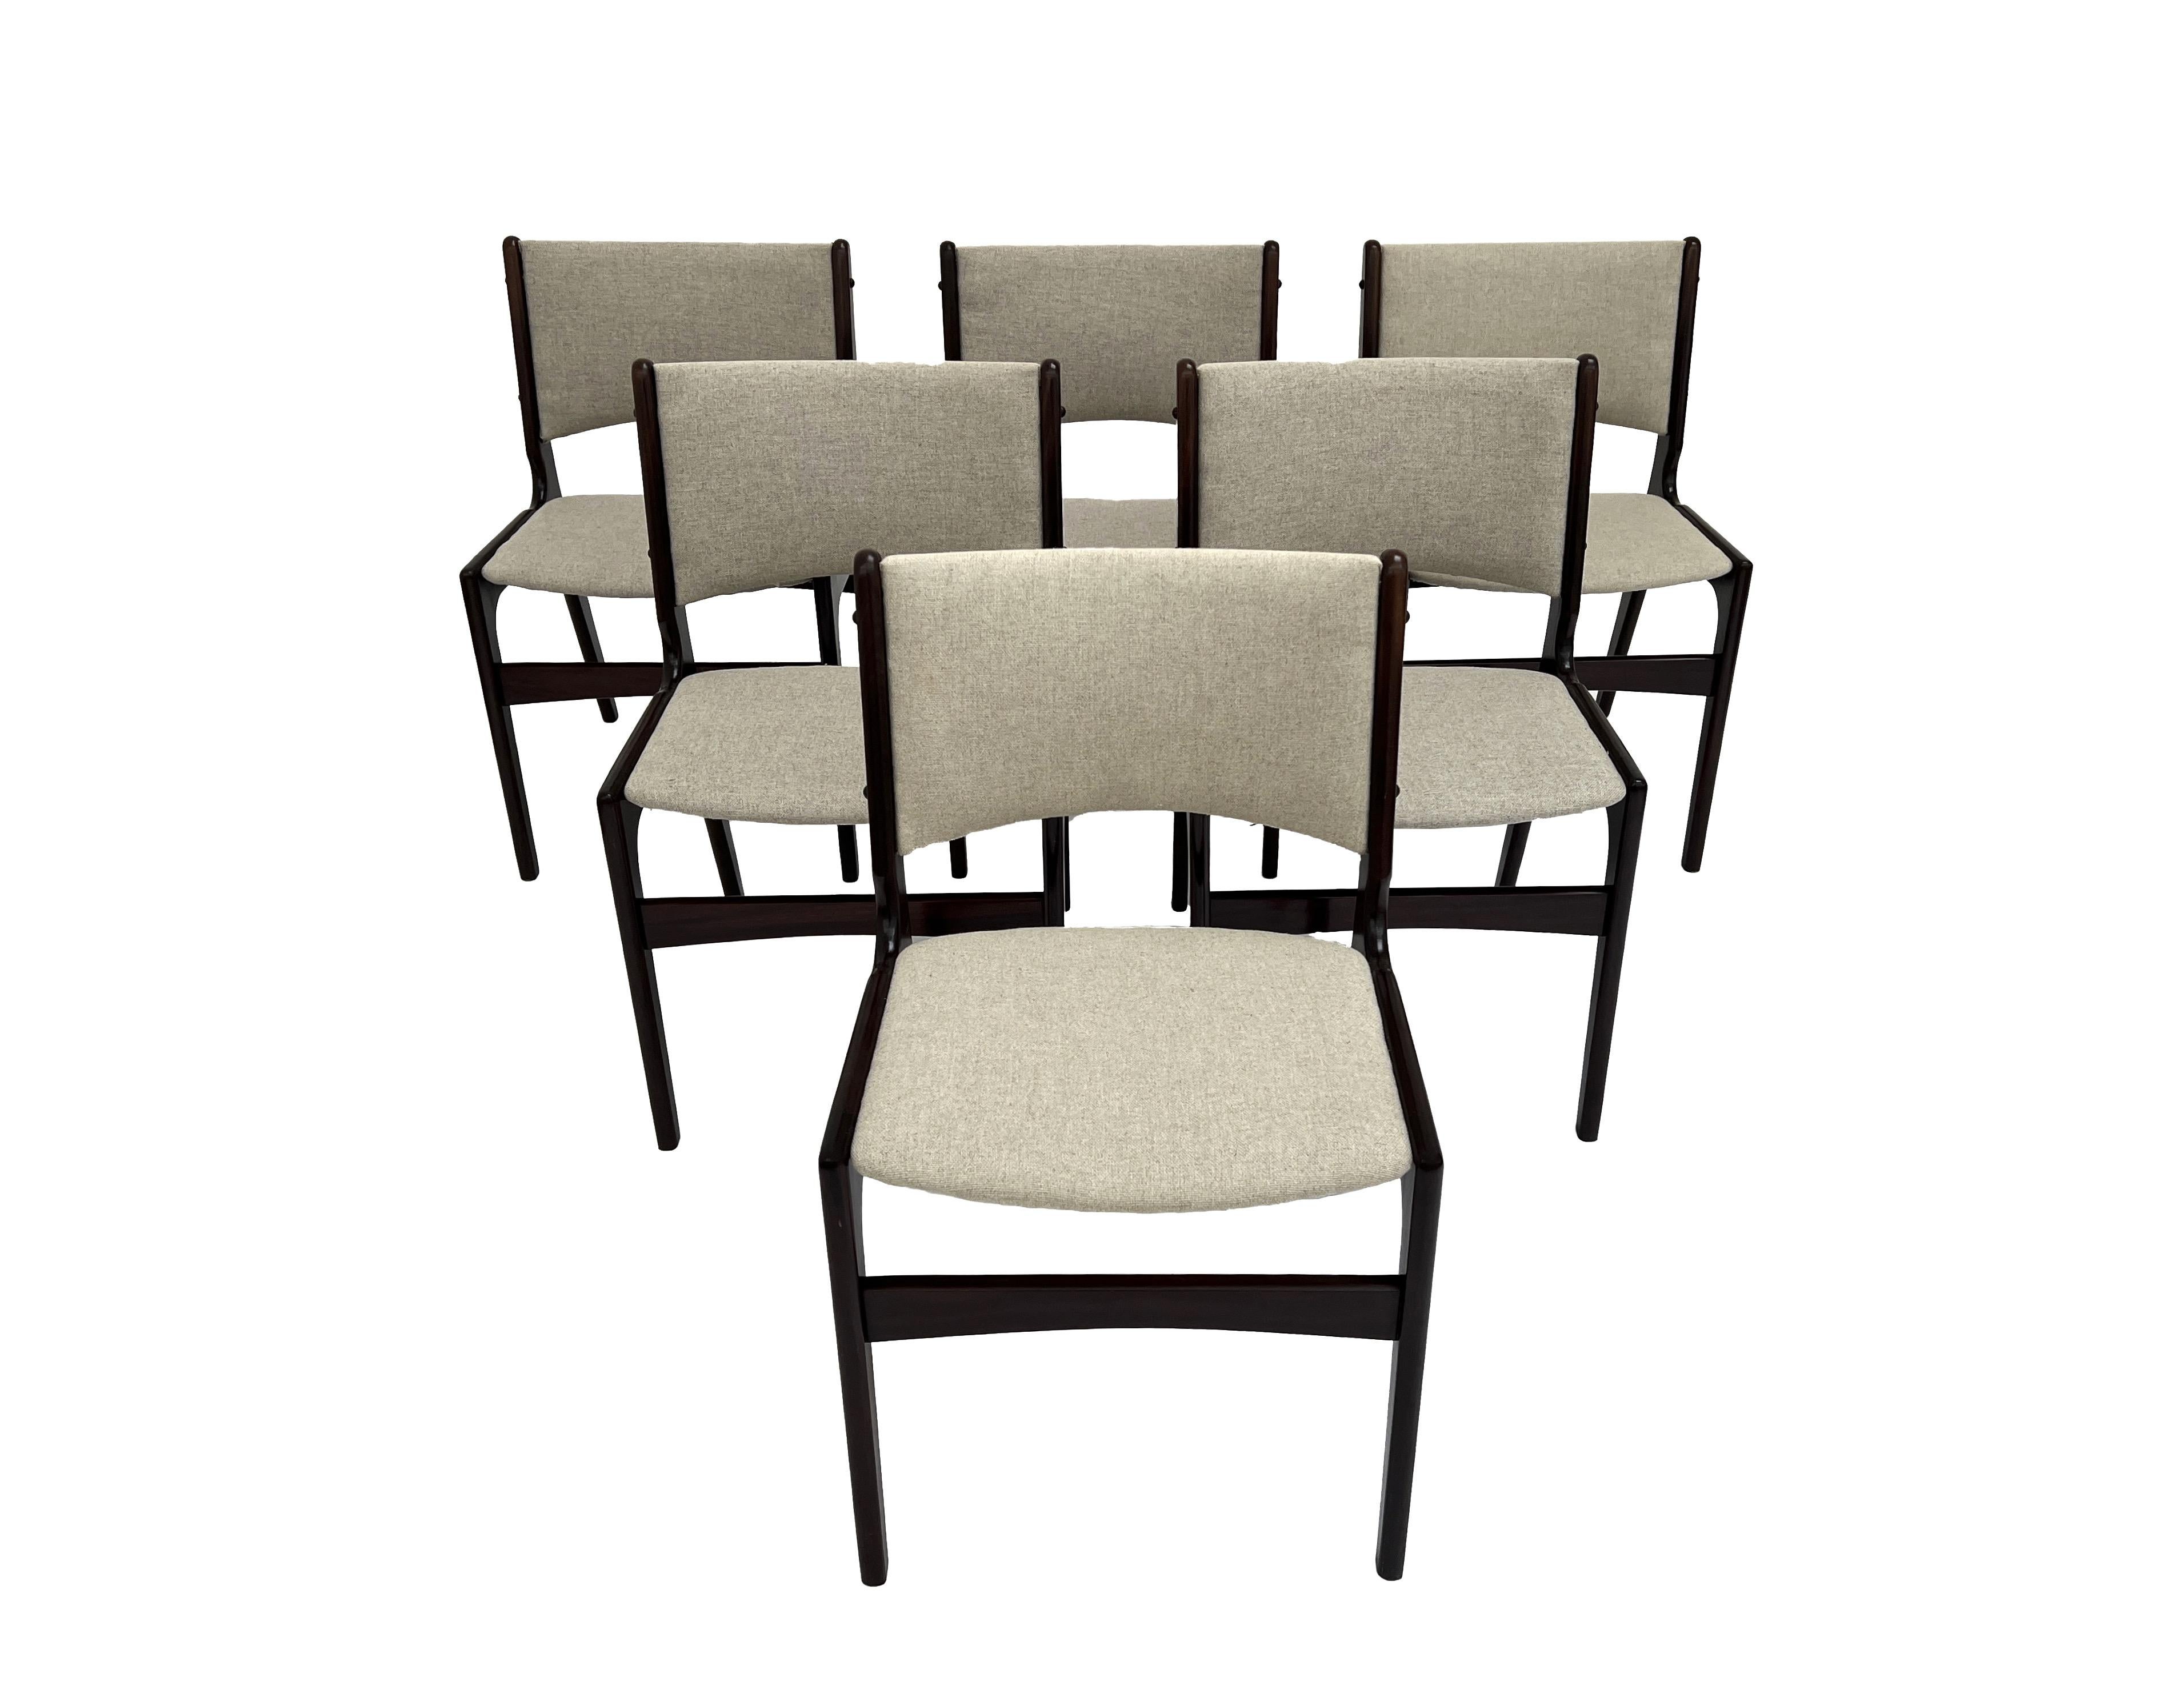 A beautiful set of 6 teak & cream wool Model 89 dining chairs designed by Erik Buch for Anders Møbelfabrik, these would make a stylish addition to any dining area.

The chairs have wide seat pads and sculptured backrests for enhanced comfort. A